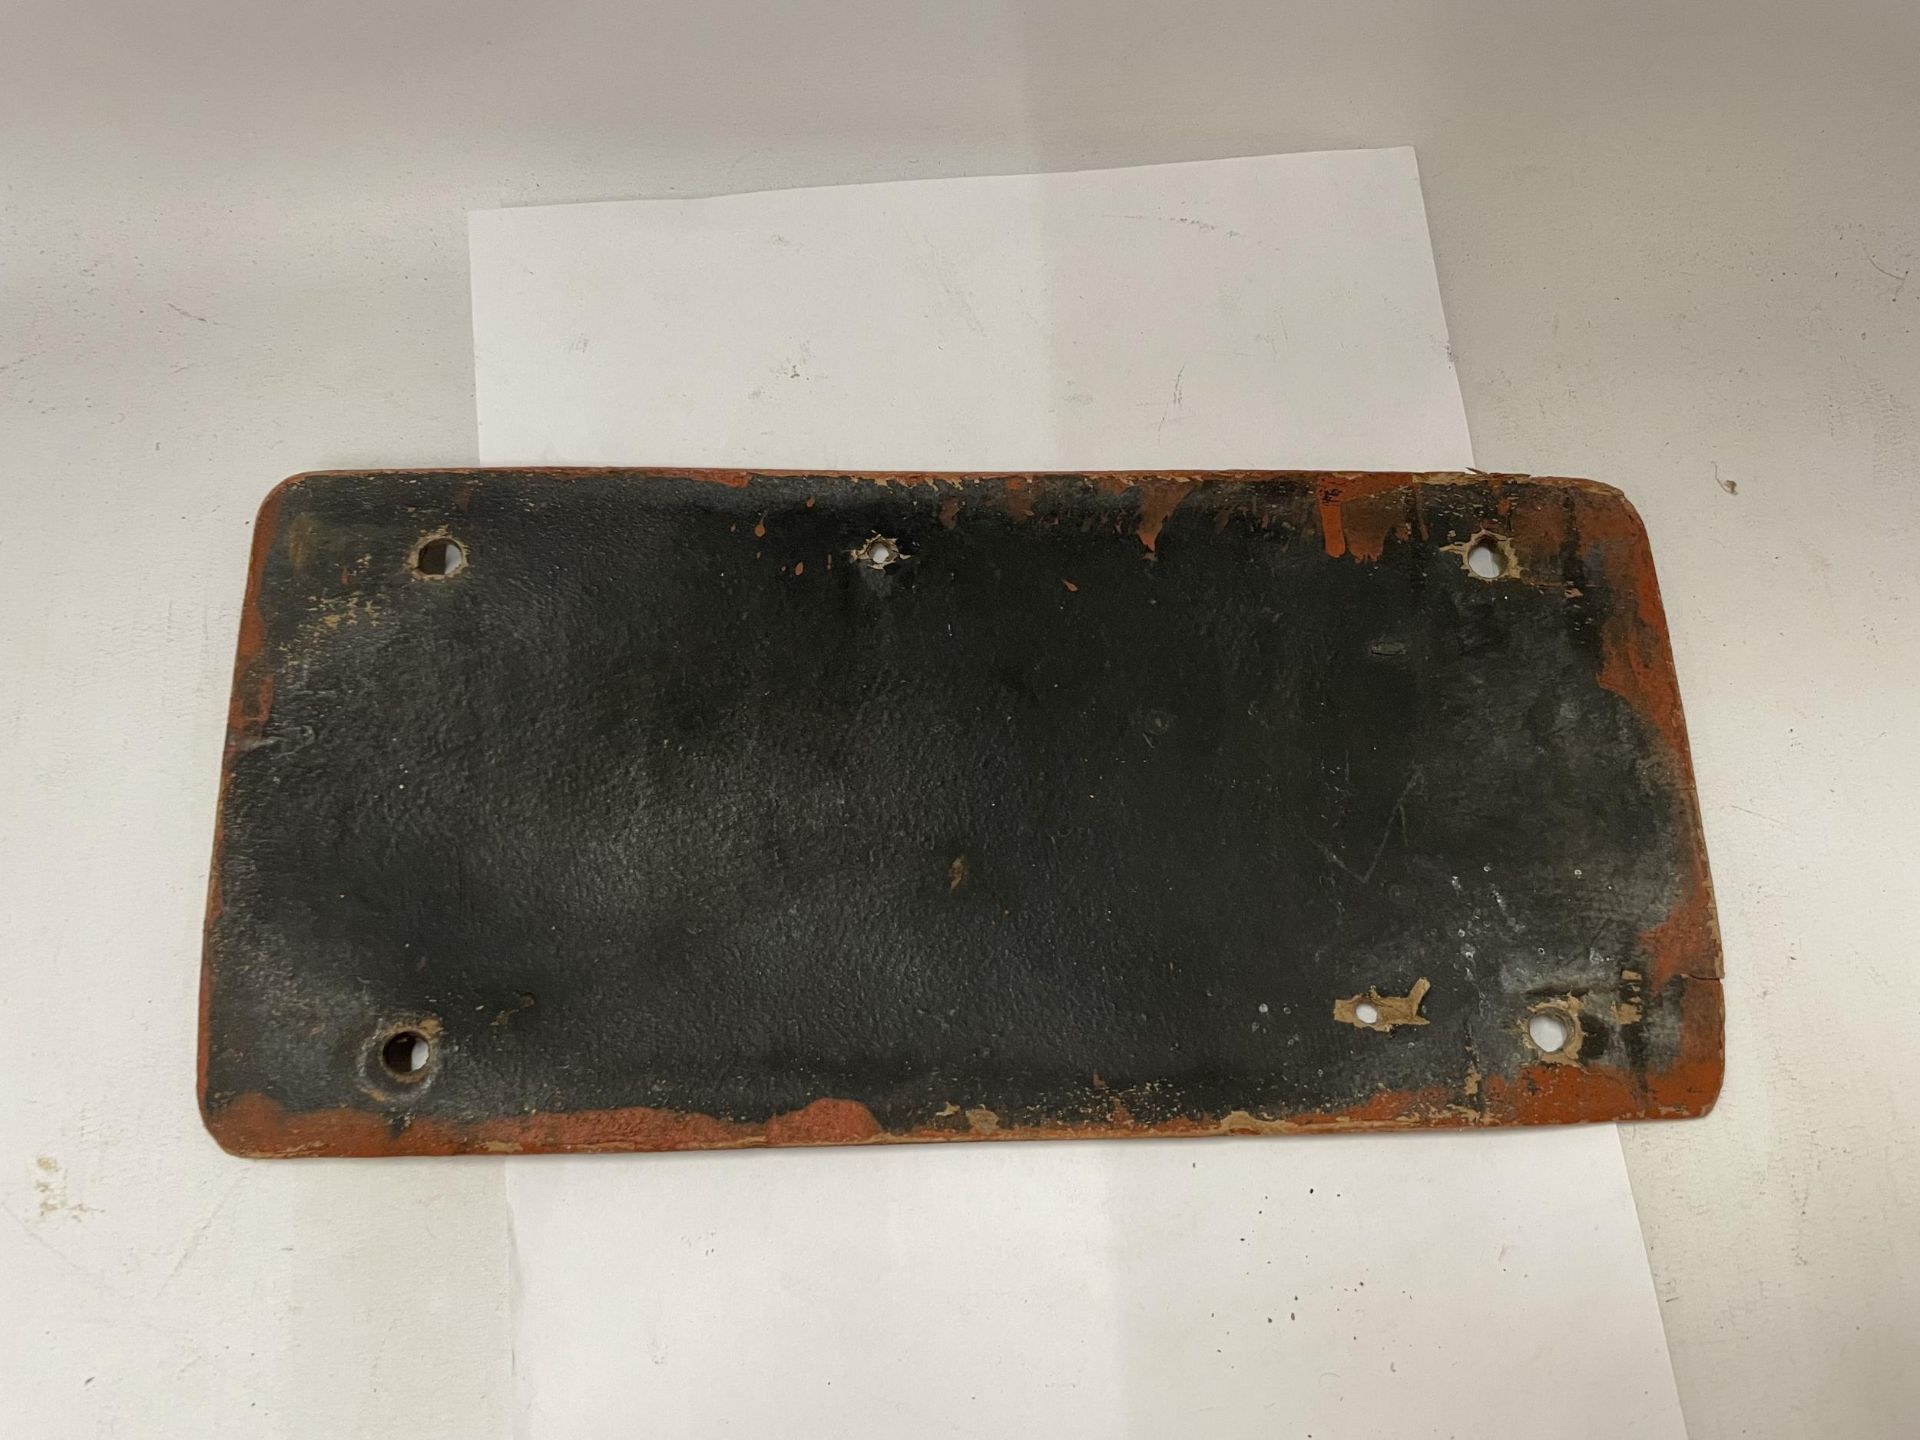 A VINTAGE LEATHER ILLONOIS NUMBER PLATE 620 967 - Image 2 of 2